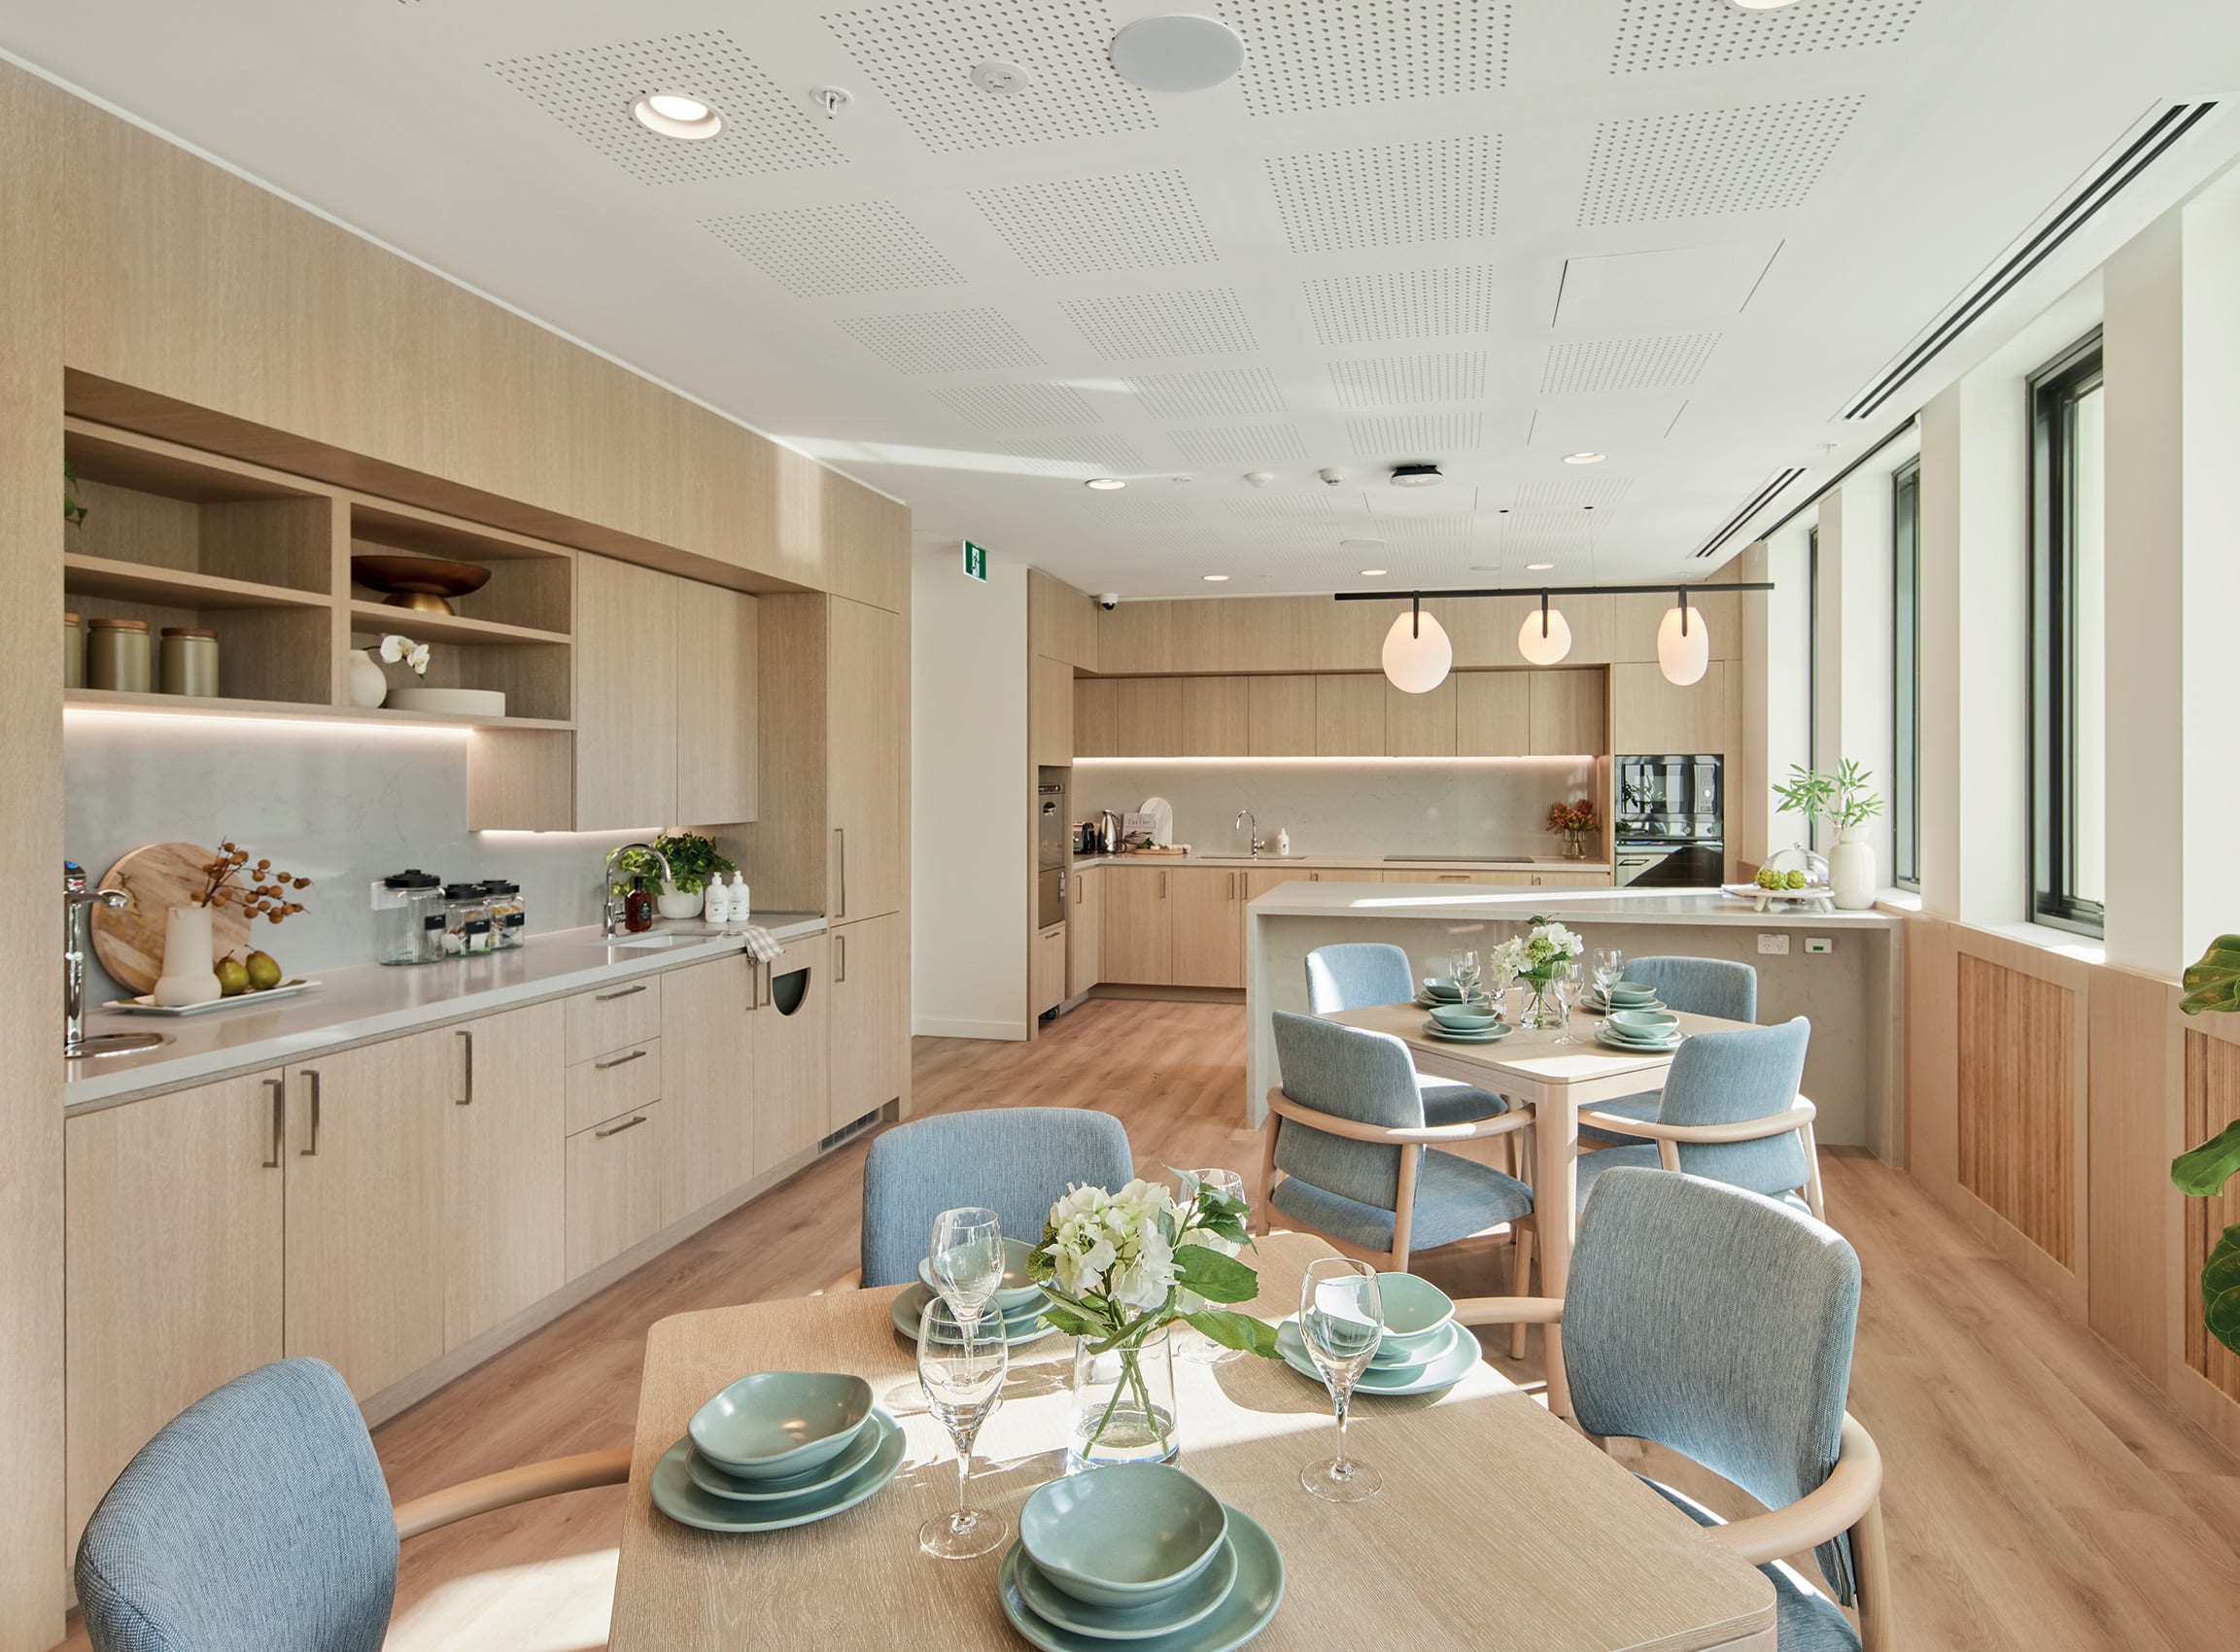 Communal lounge, dining room and kitchen at The Alba Care Suites.